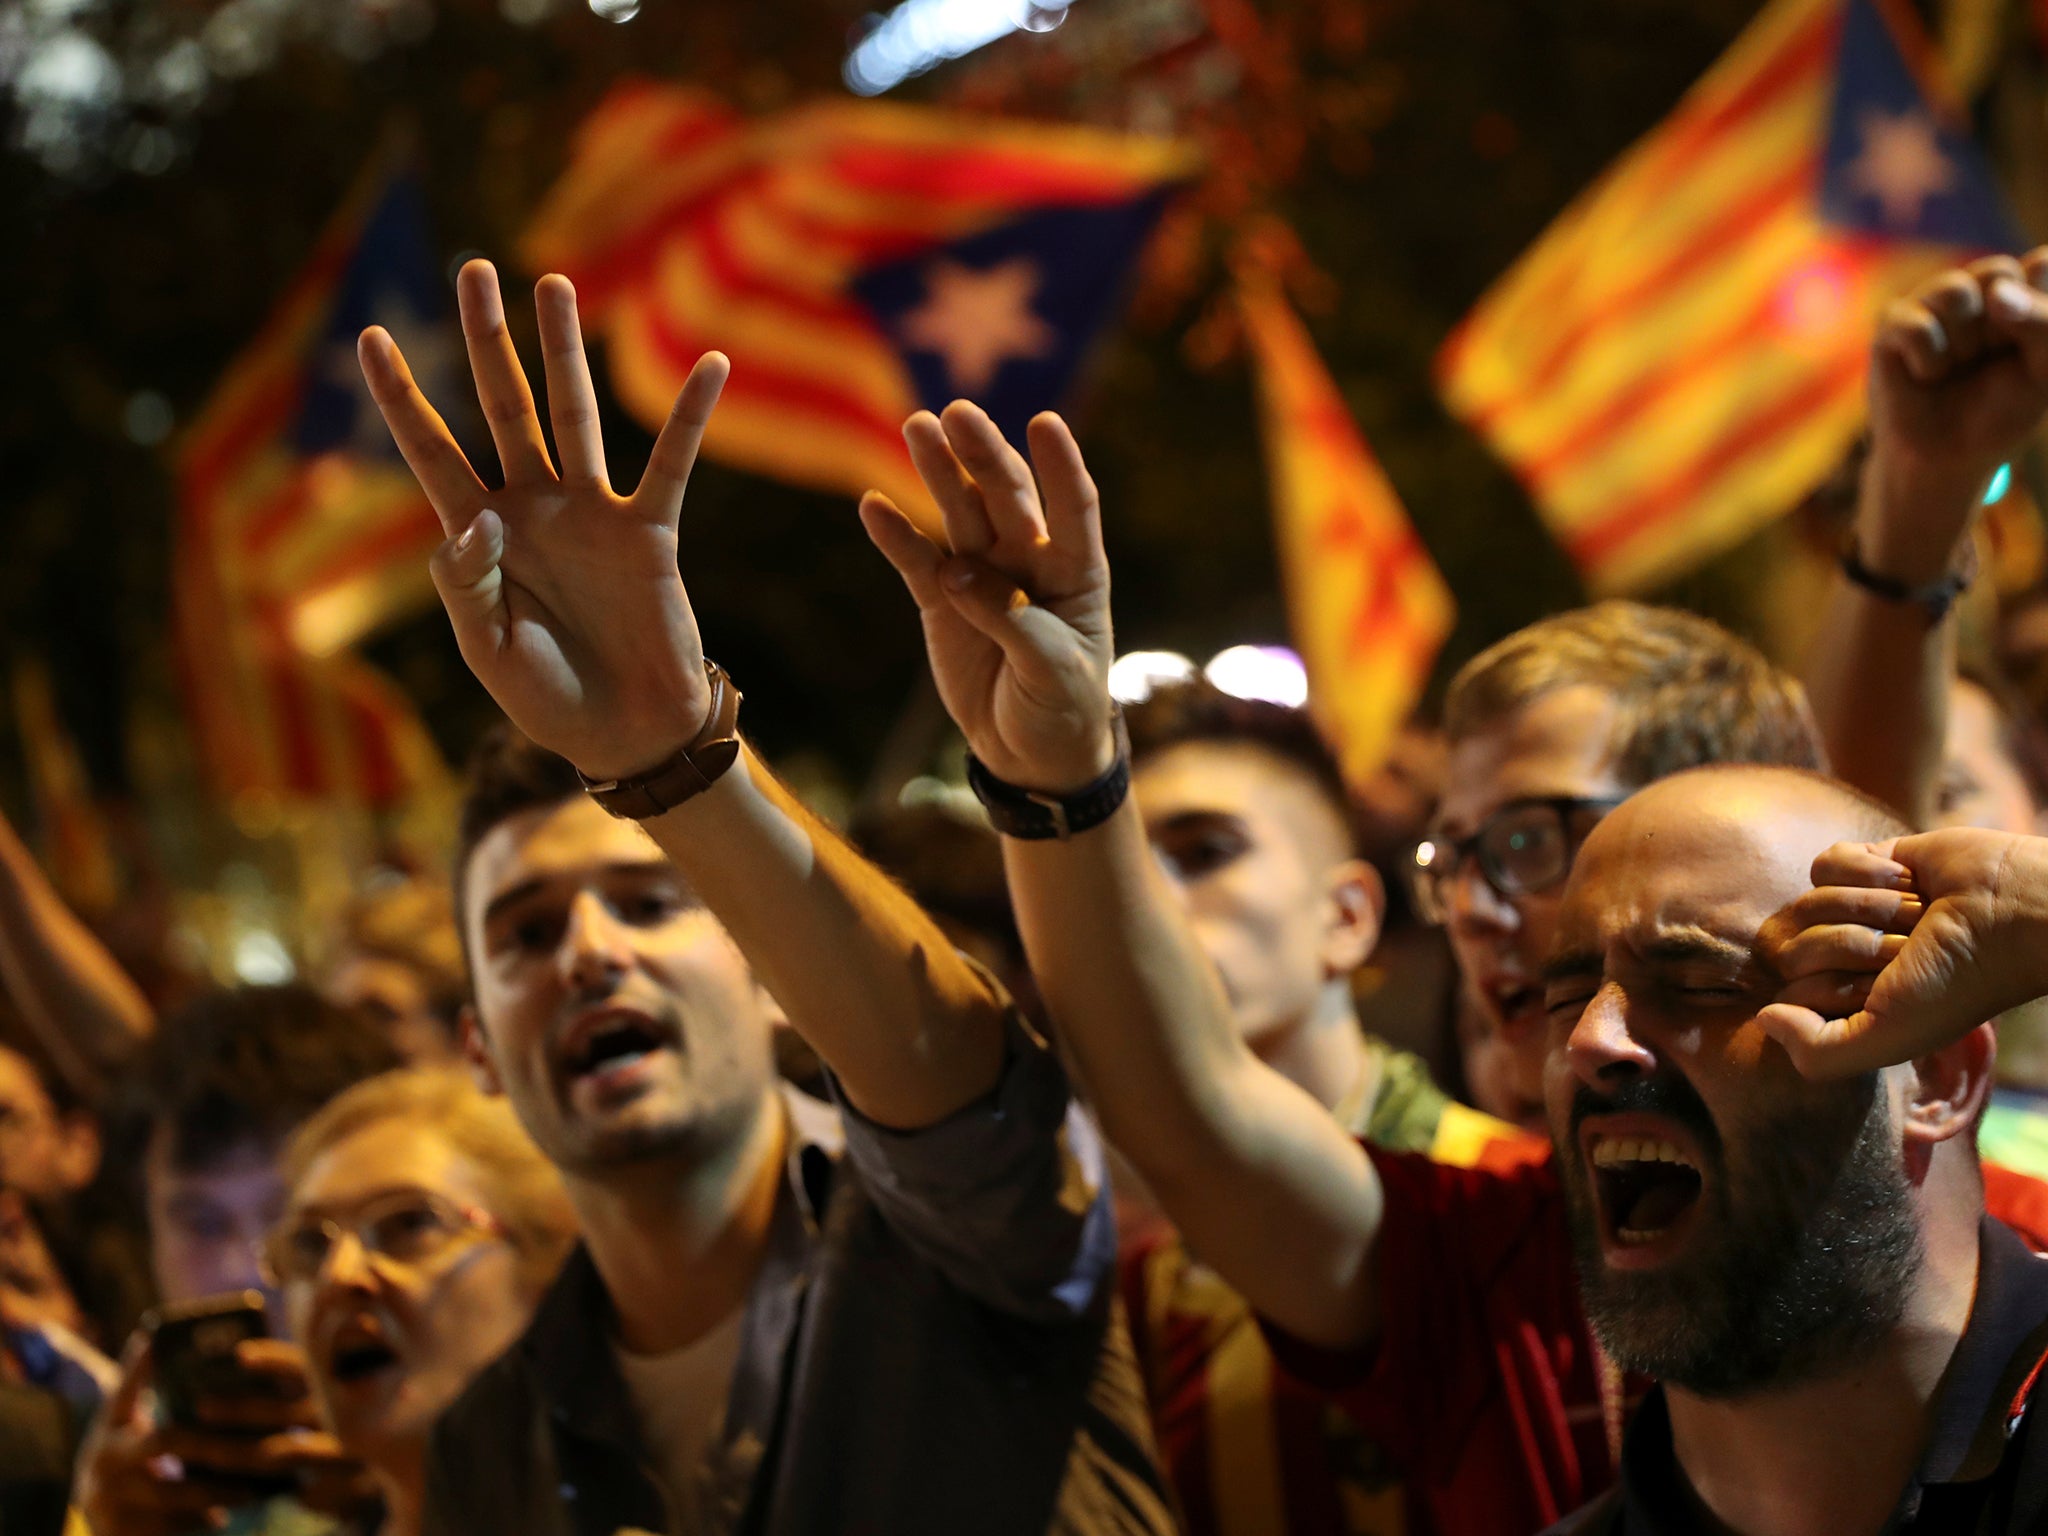 Protesters sing as they gather outside the Catalan region's economy ministry building during a raid by Spanish police on government offices, in Barcelona